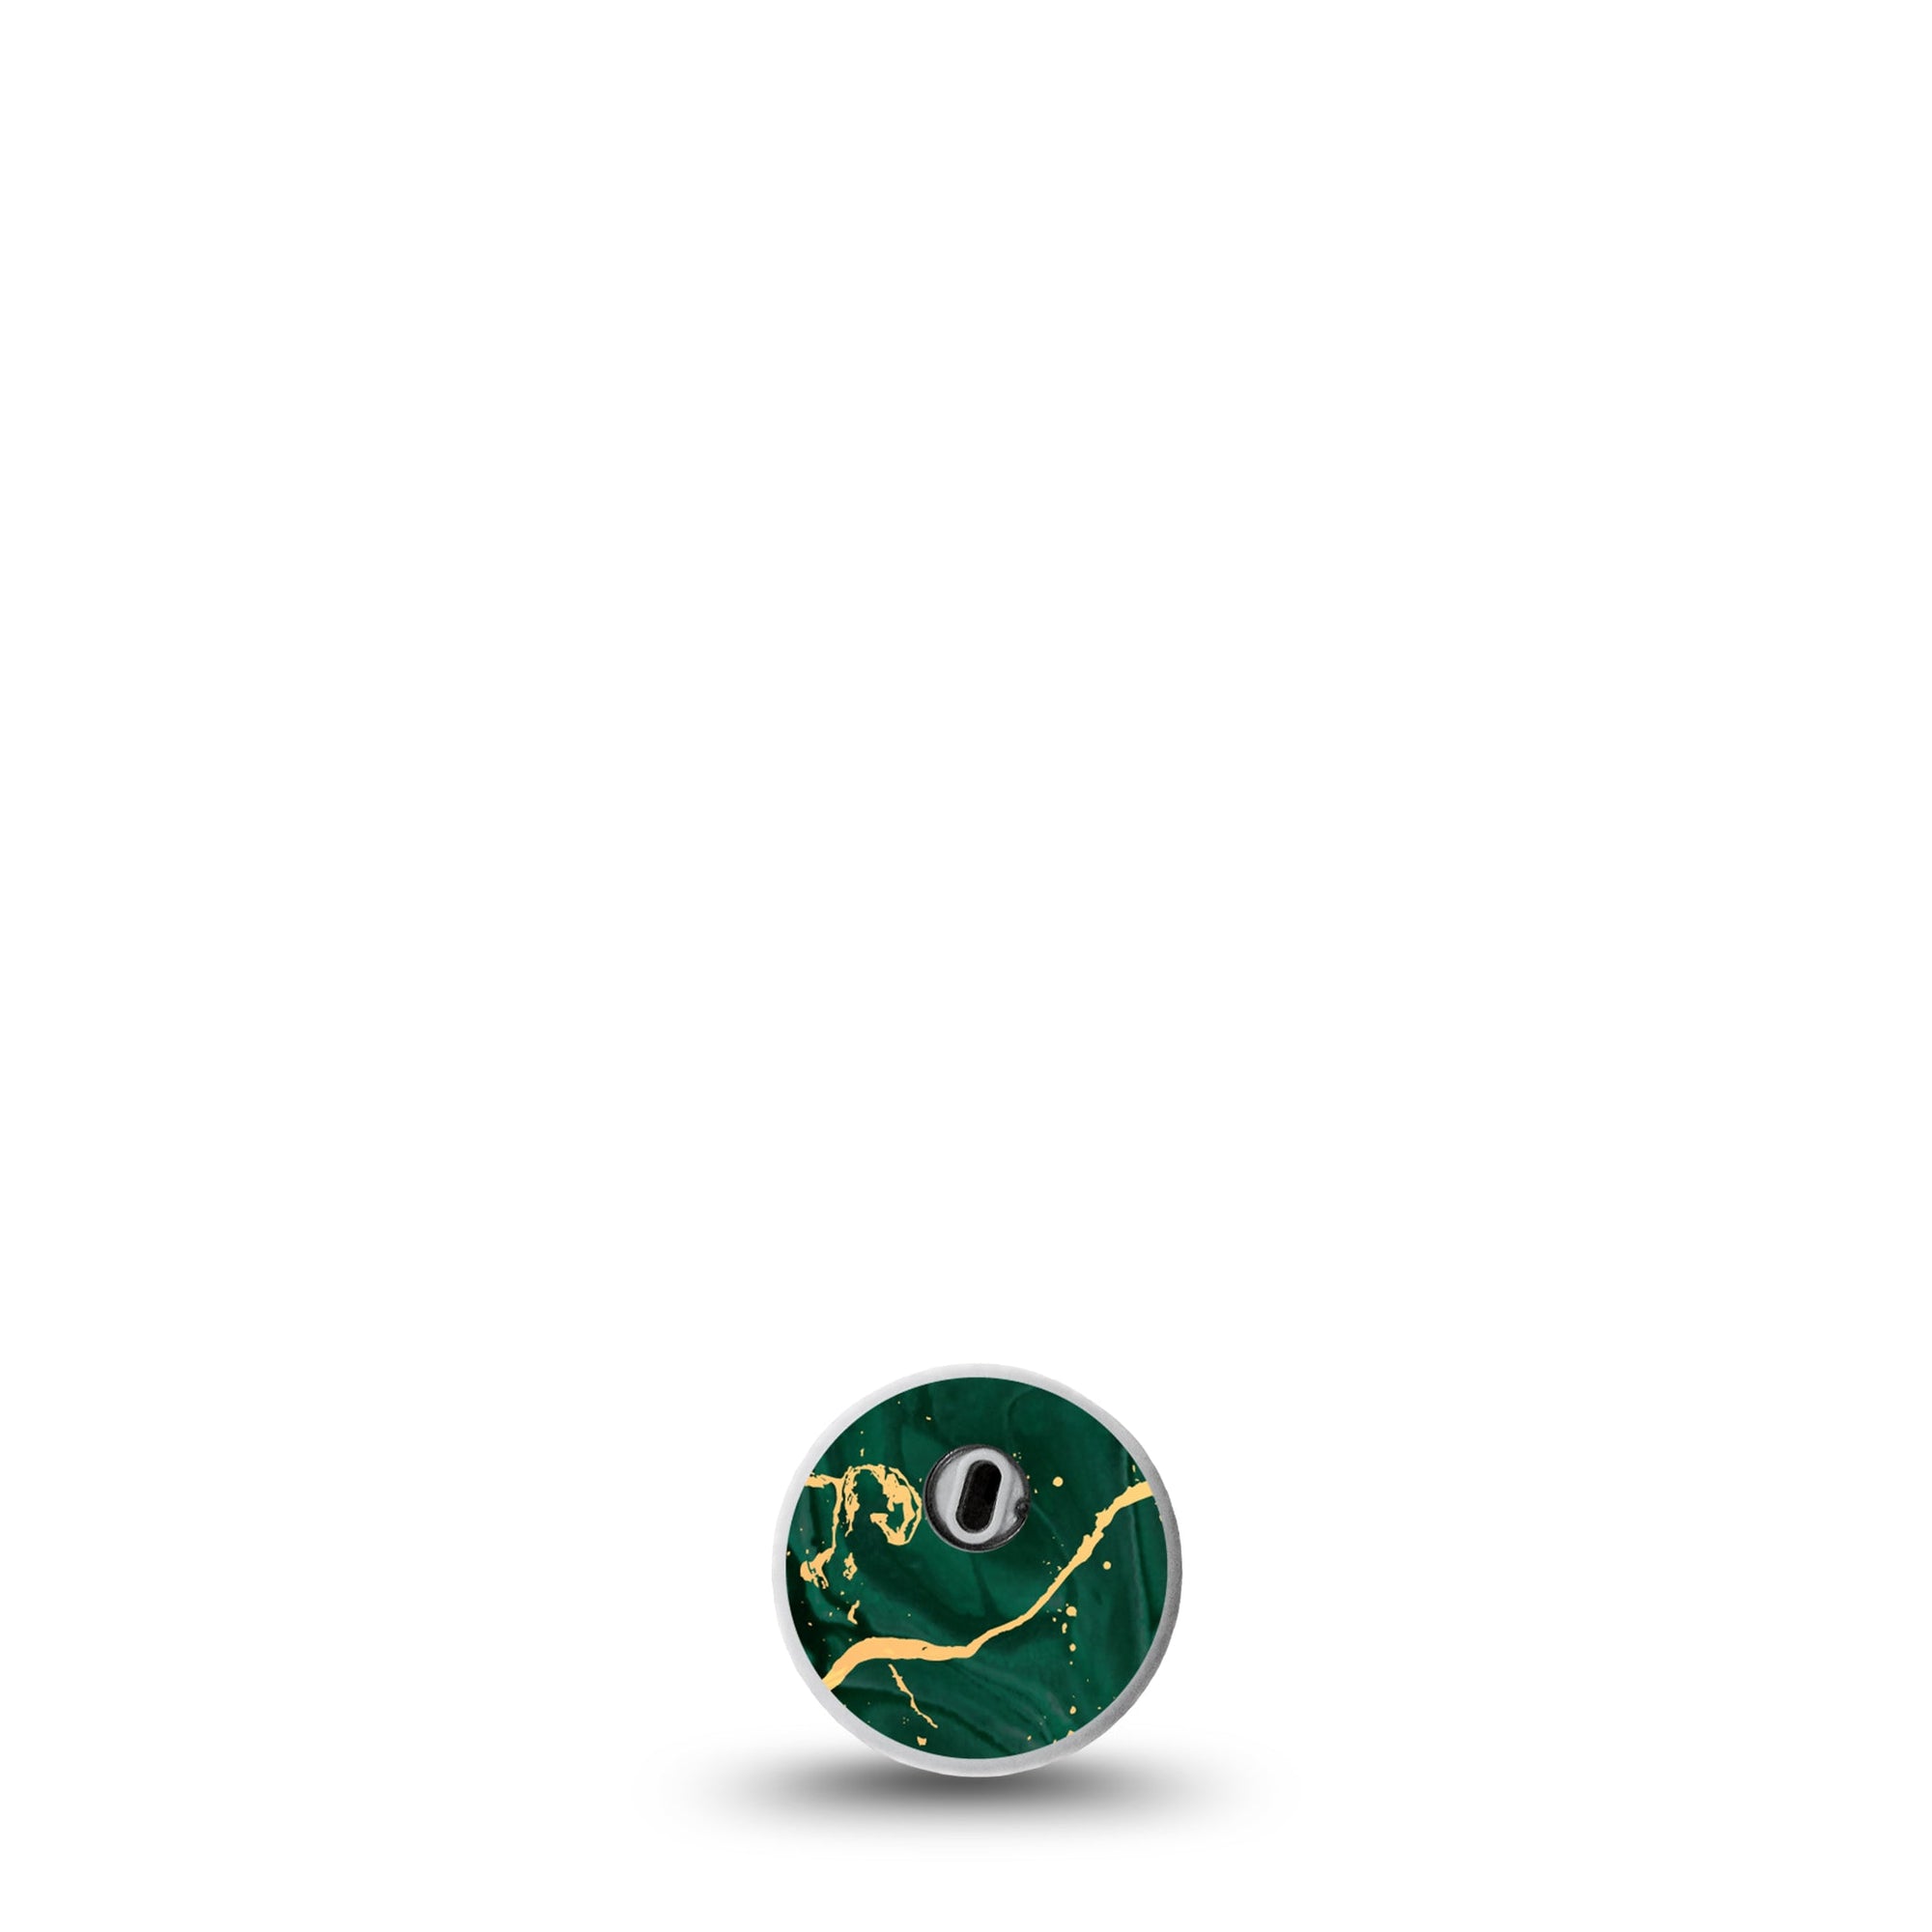 ExpressionMed Green & Gold Marble Libre 3 Sticker Precious Emerald Stone Streaked With Gold, CGM Fixing Ring Patch Design